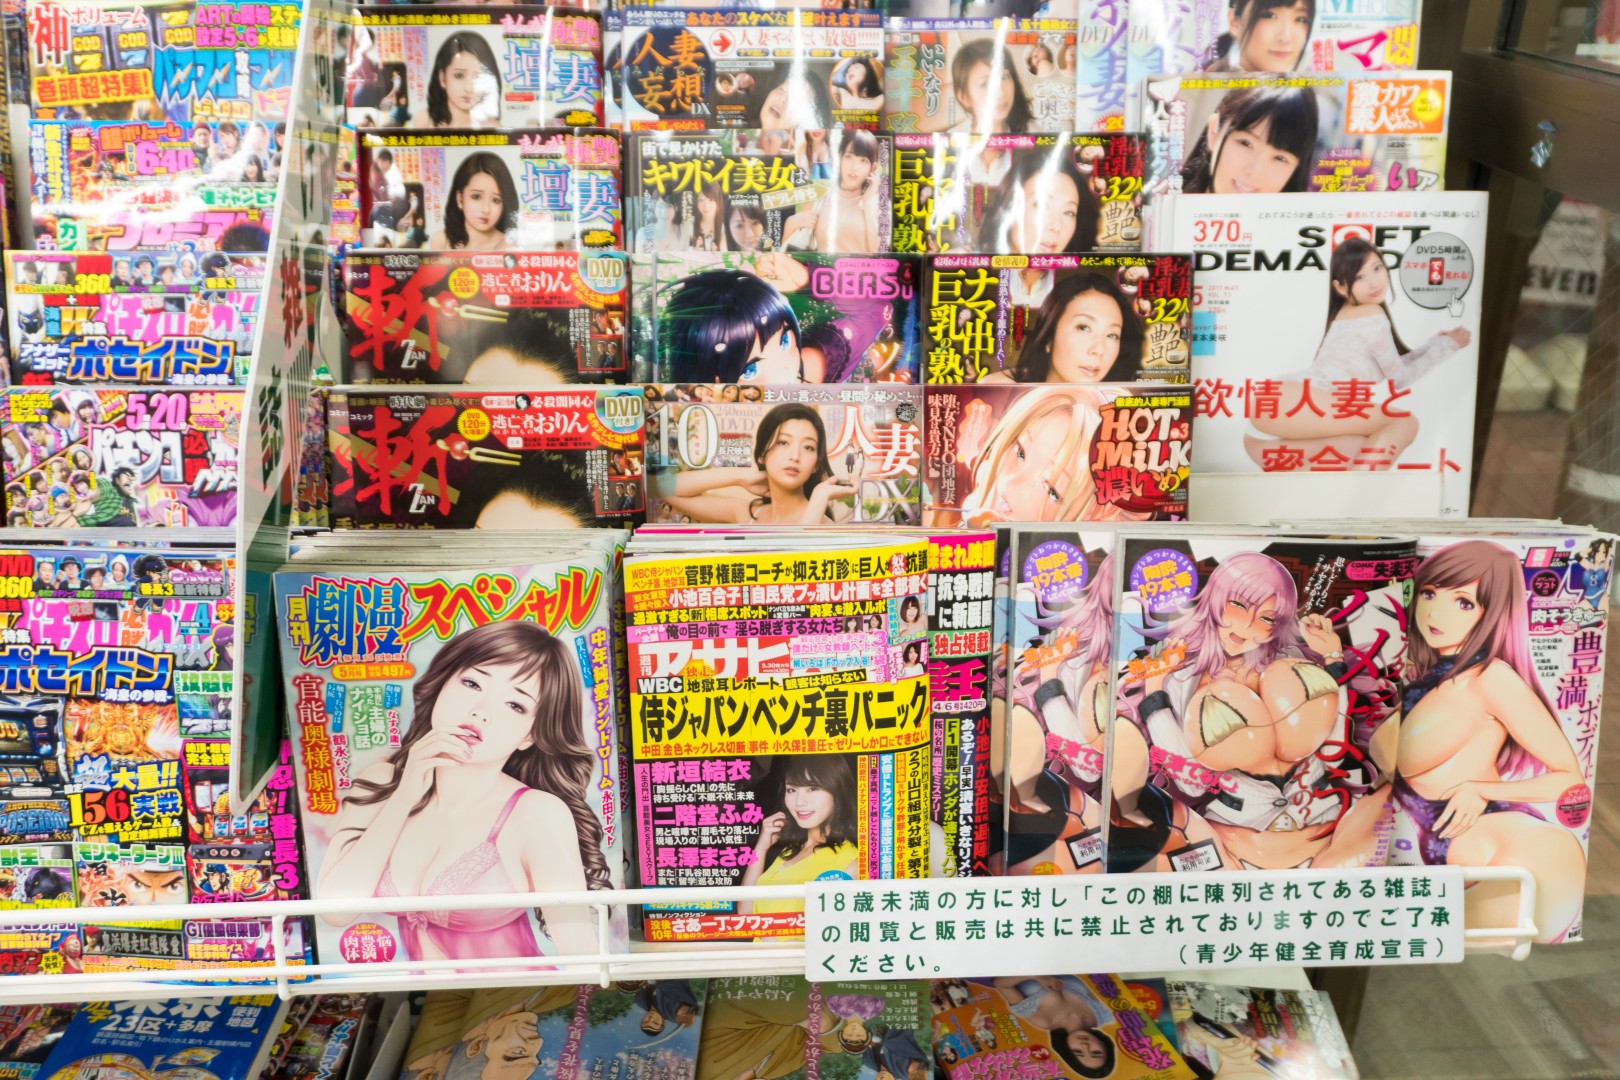 Popular Porn Magazines - Porn free: Japan to take adult magazines off convenience ...